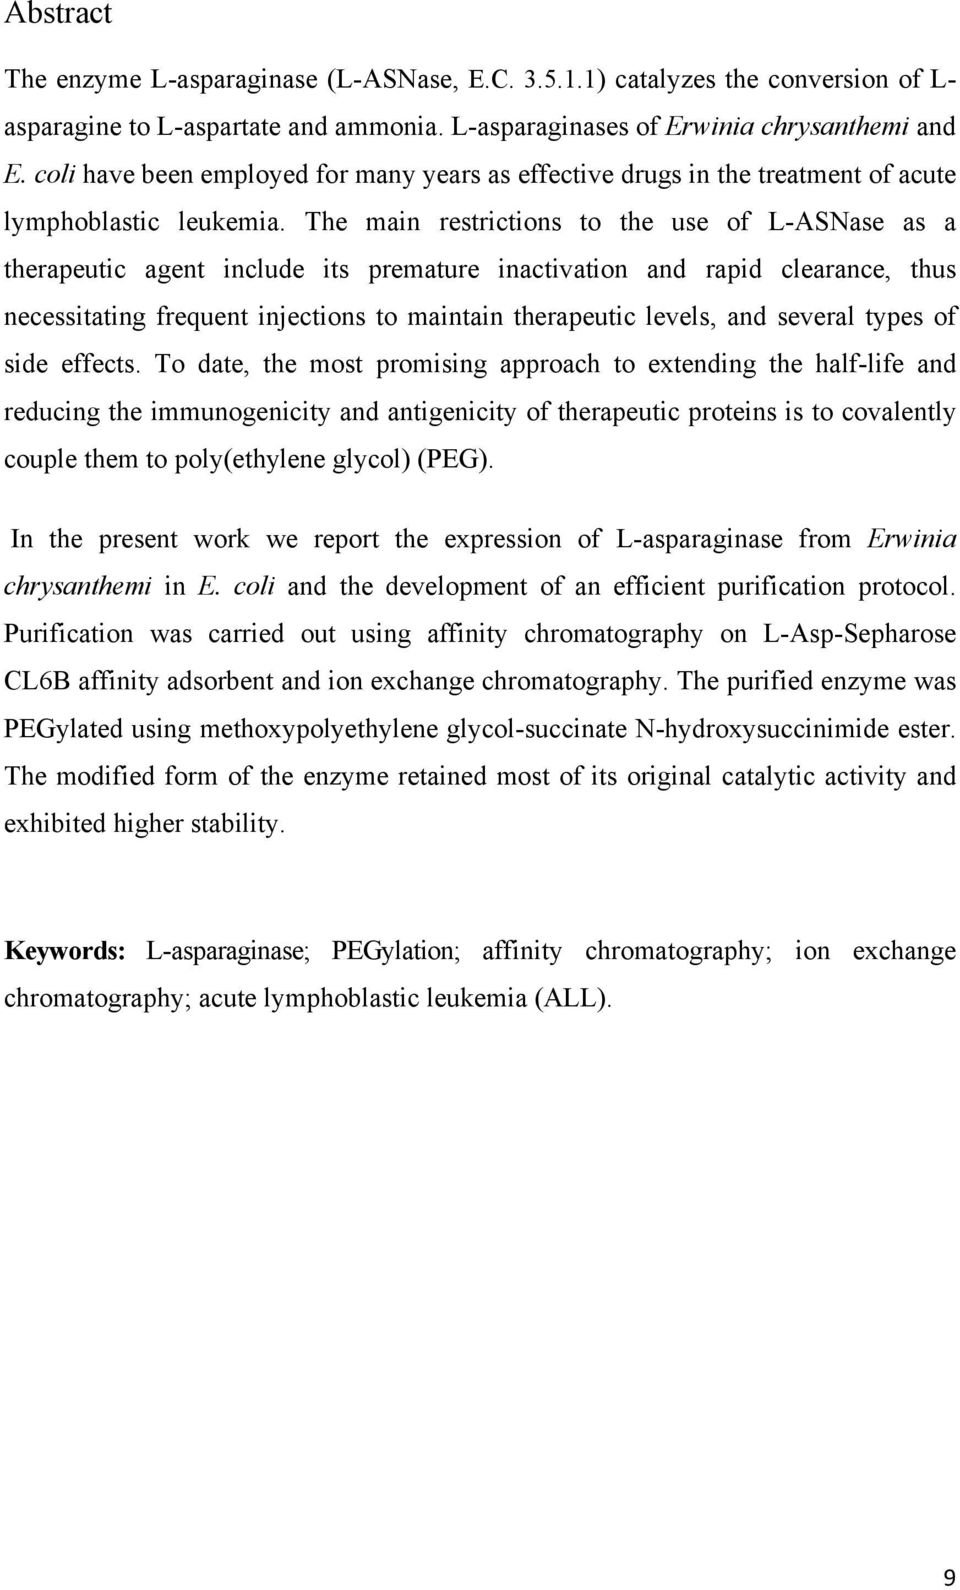 The main restrictions to the use of L-ASNase as a therapeutic agent include its premature inactivation and rapid clearance, thus necessitating frequent injections to maintain therapeutic levels, and